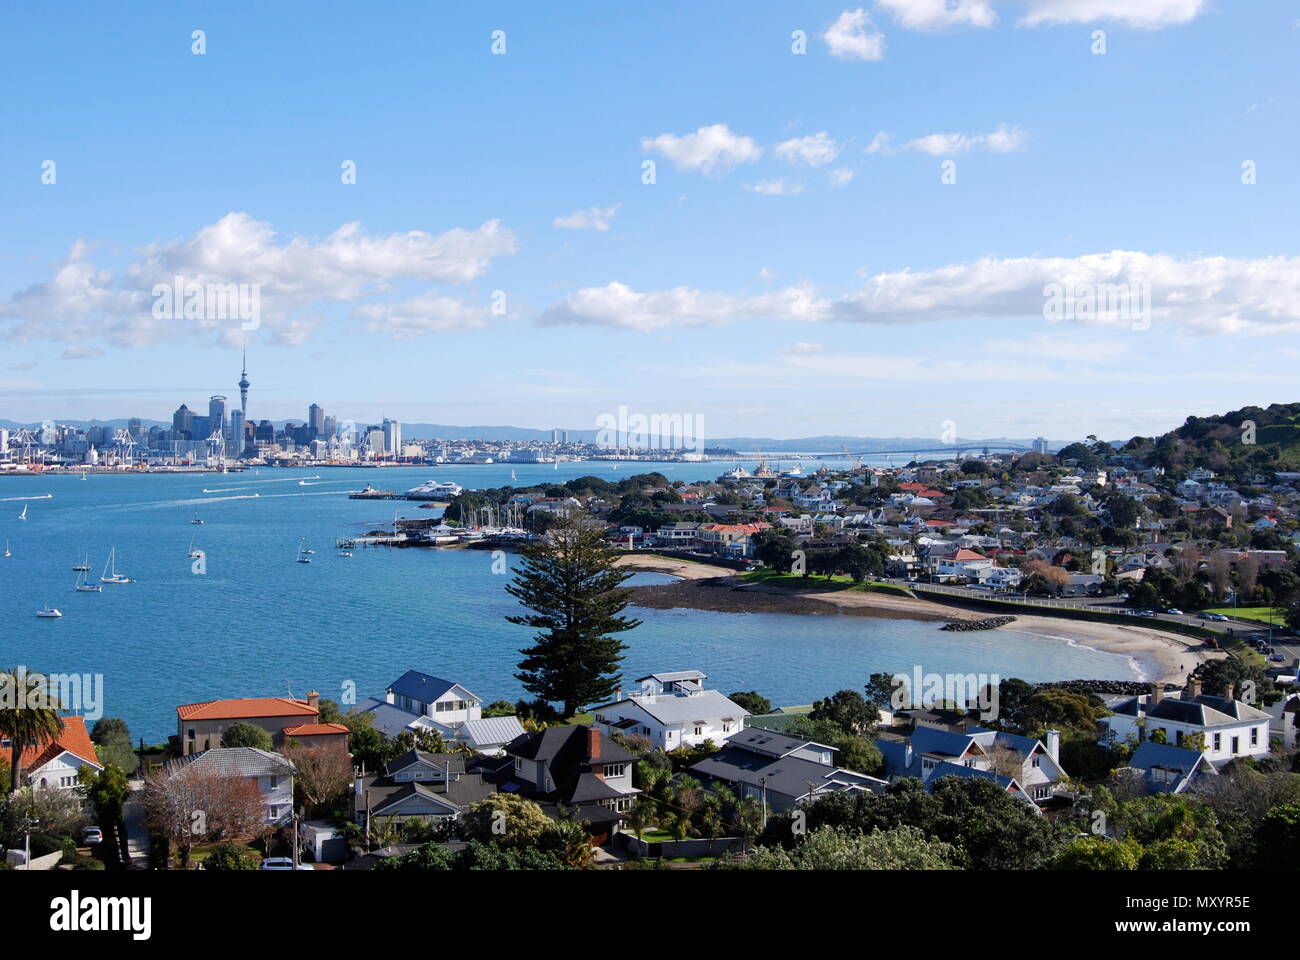 Landscape photograph of Auckland Harbour from Devonport, North Shore, looking out over the water to the sky tower in Auckland city, New Zealand Stock Photo